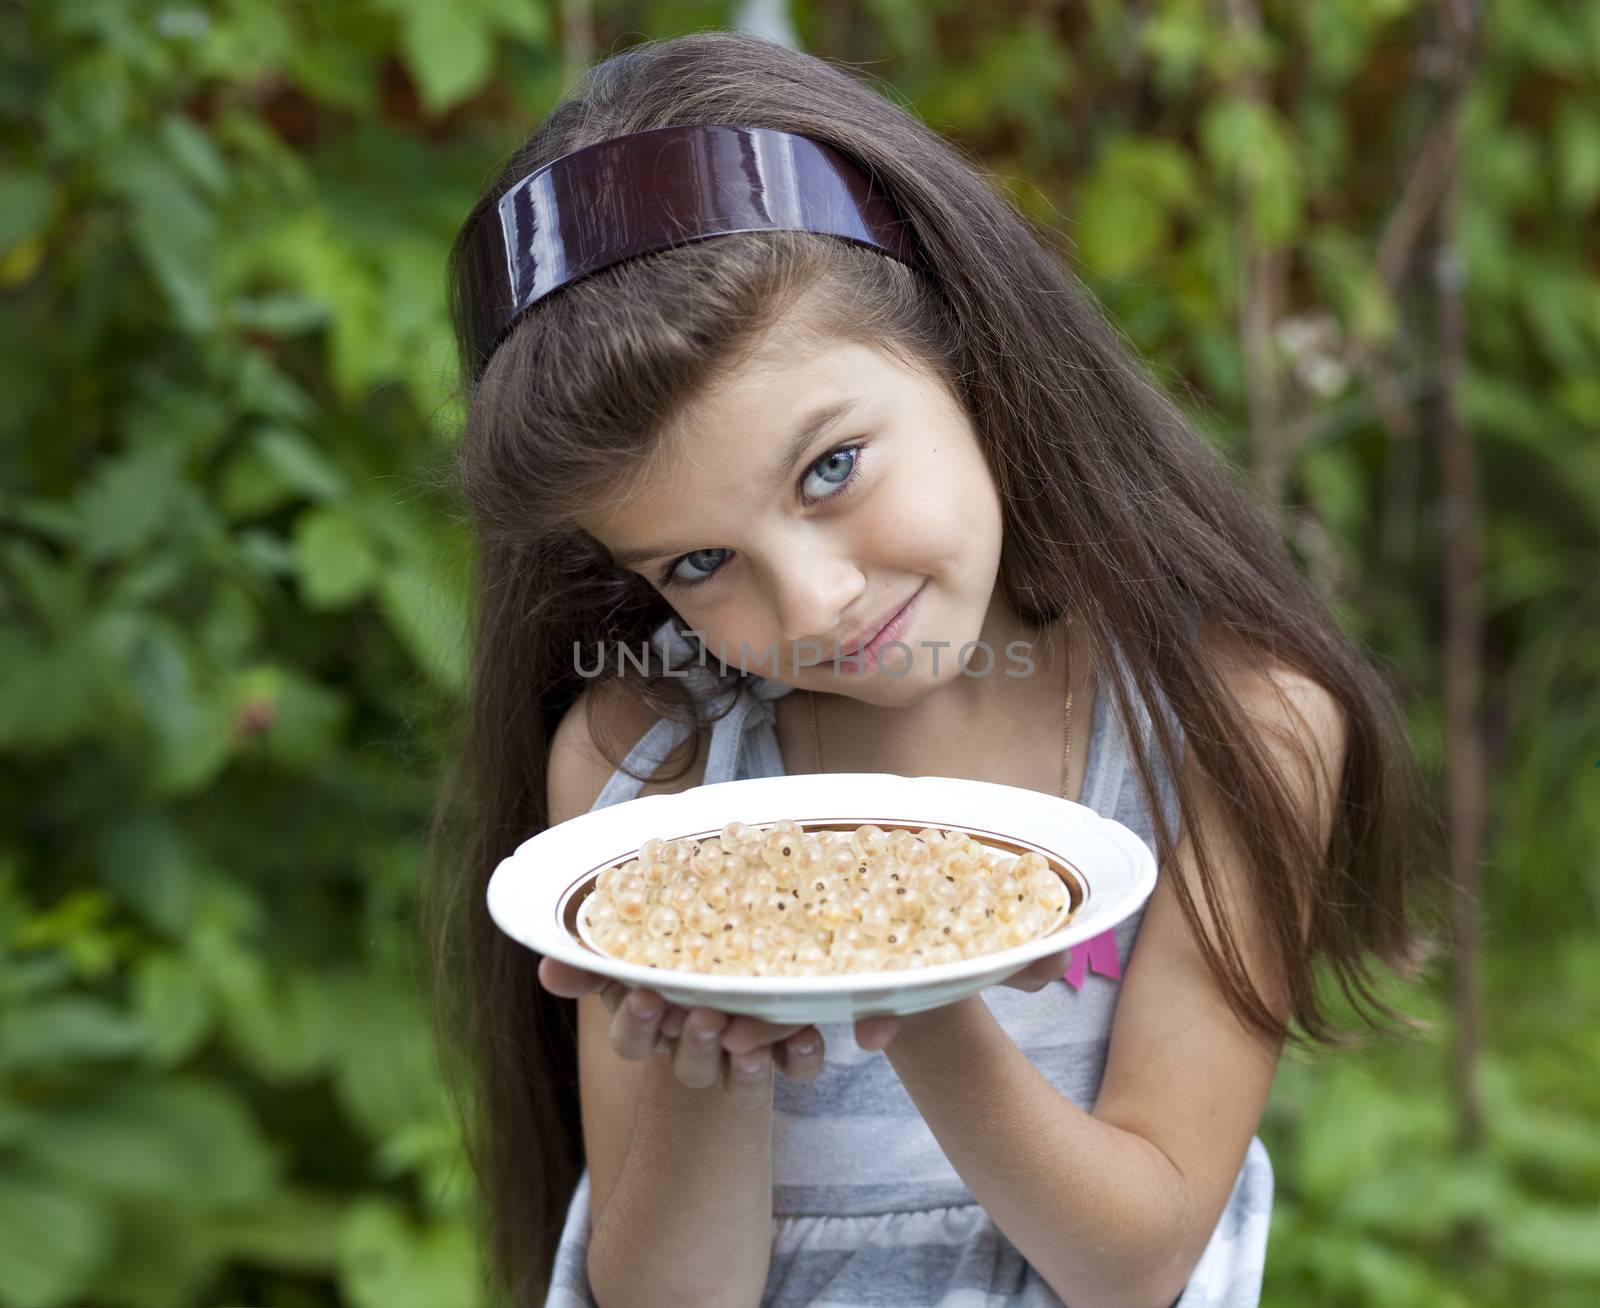 Little girl holding a plate with a white currants by andersonrise